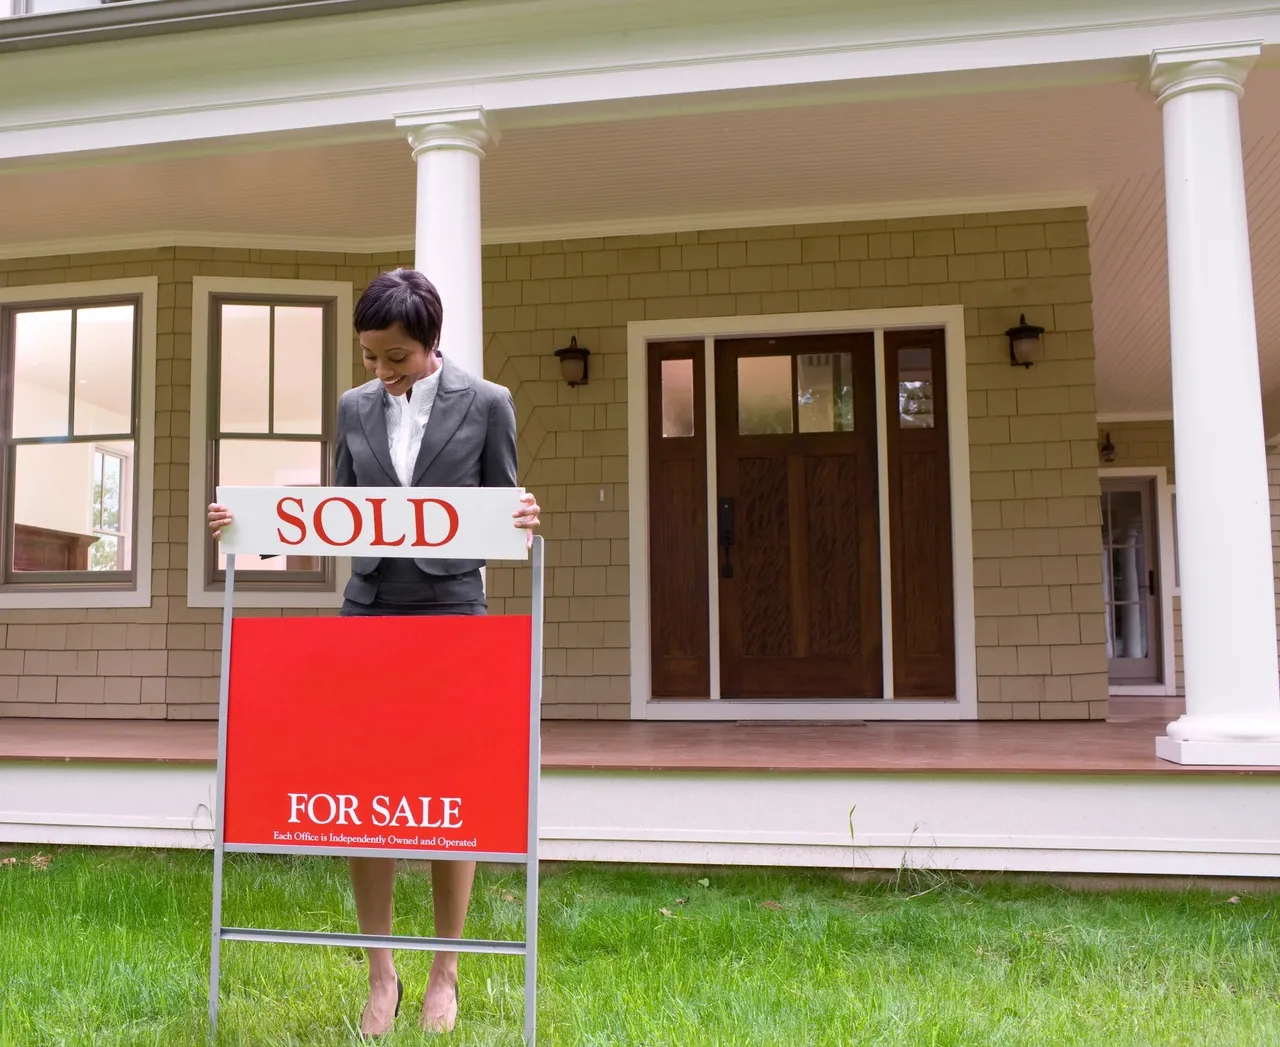 Home sellers are feeling good about 2021